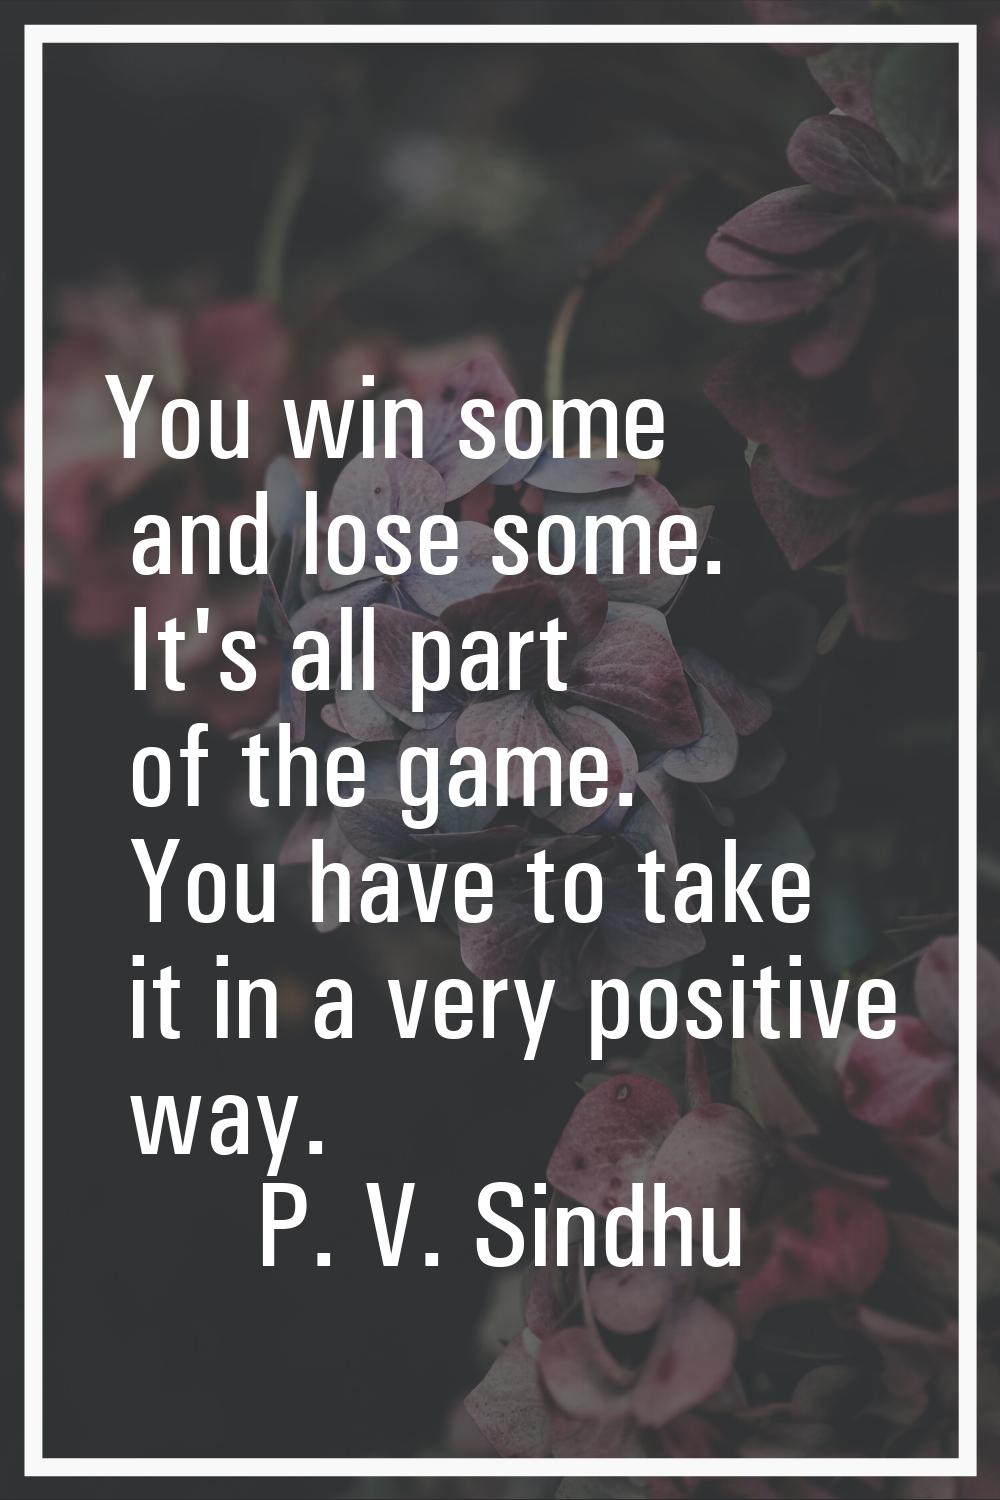 You win some and lose some. It's all part of the game. You have to take it in a very positive way.